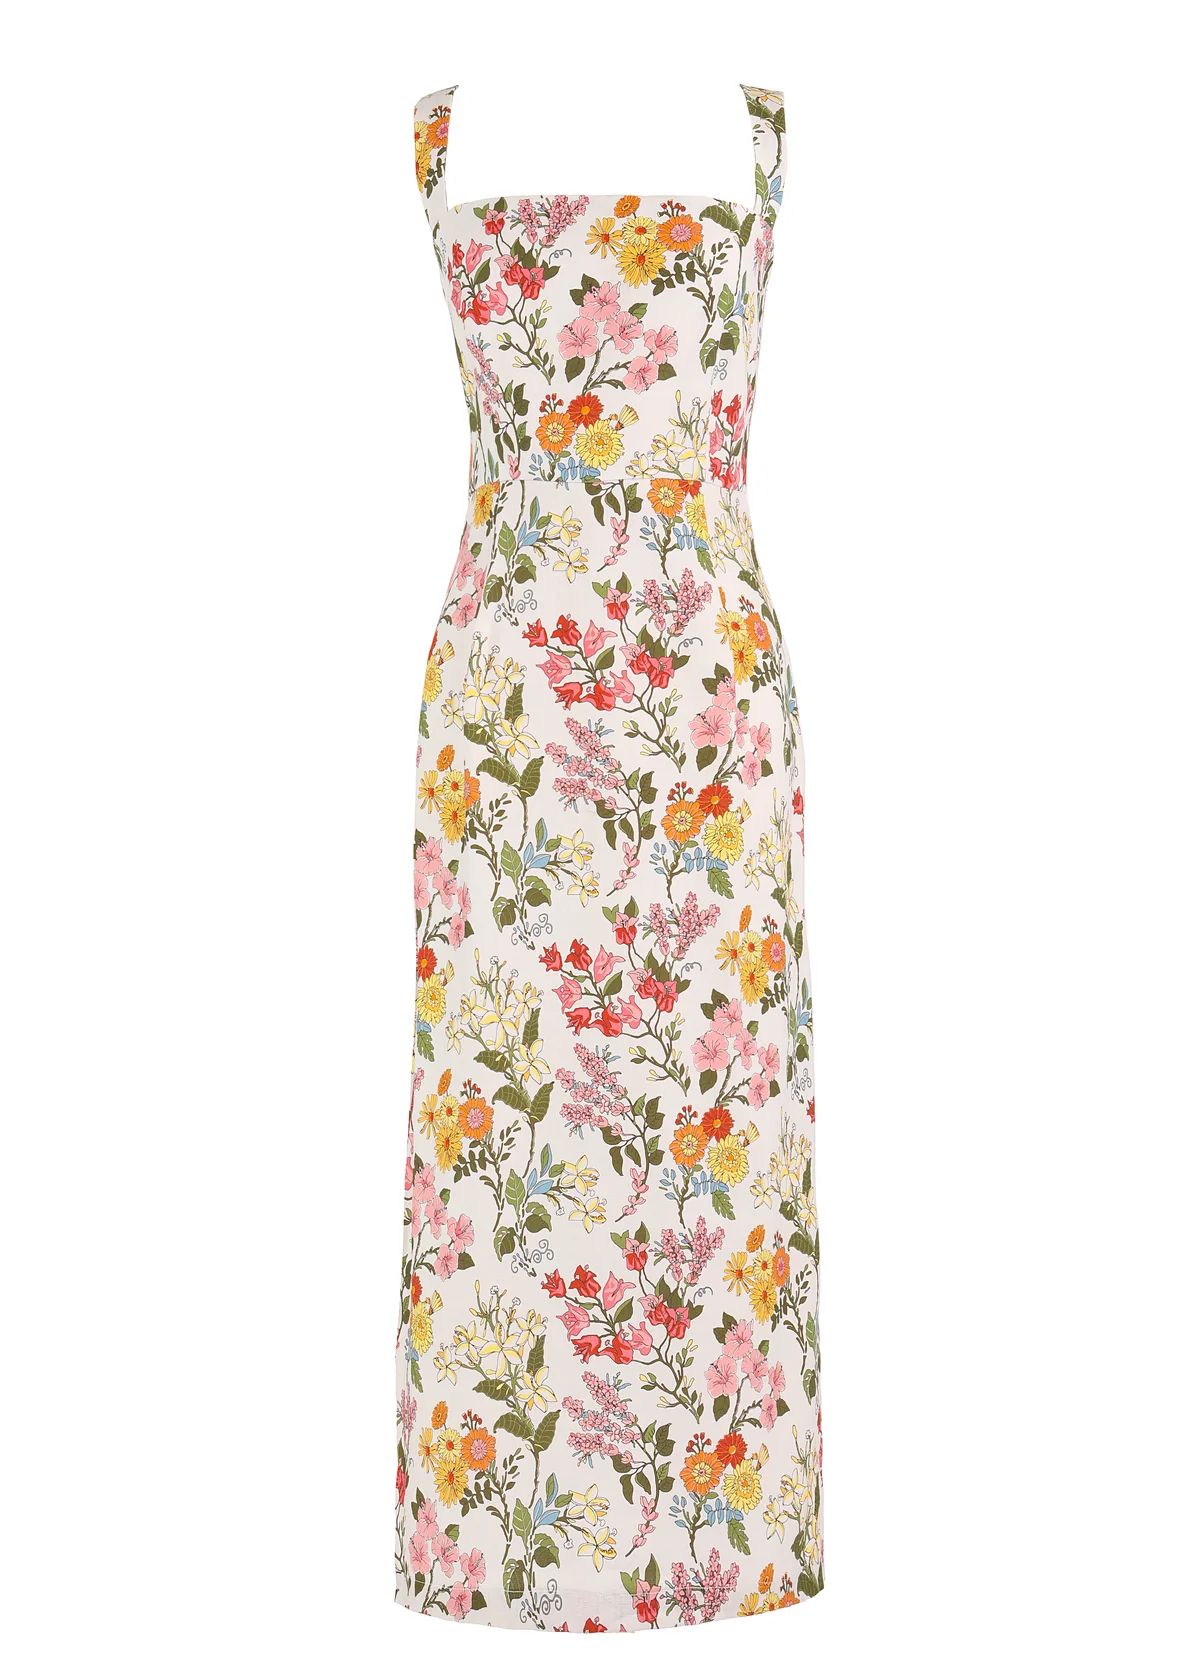 OTM Exclusive: Long Slip Dress in Multi Floral | Over The Moon